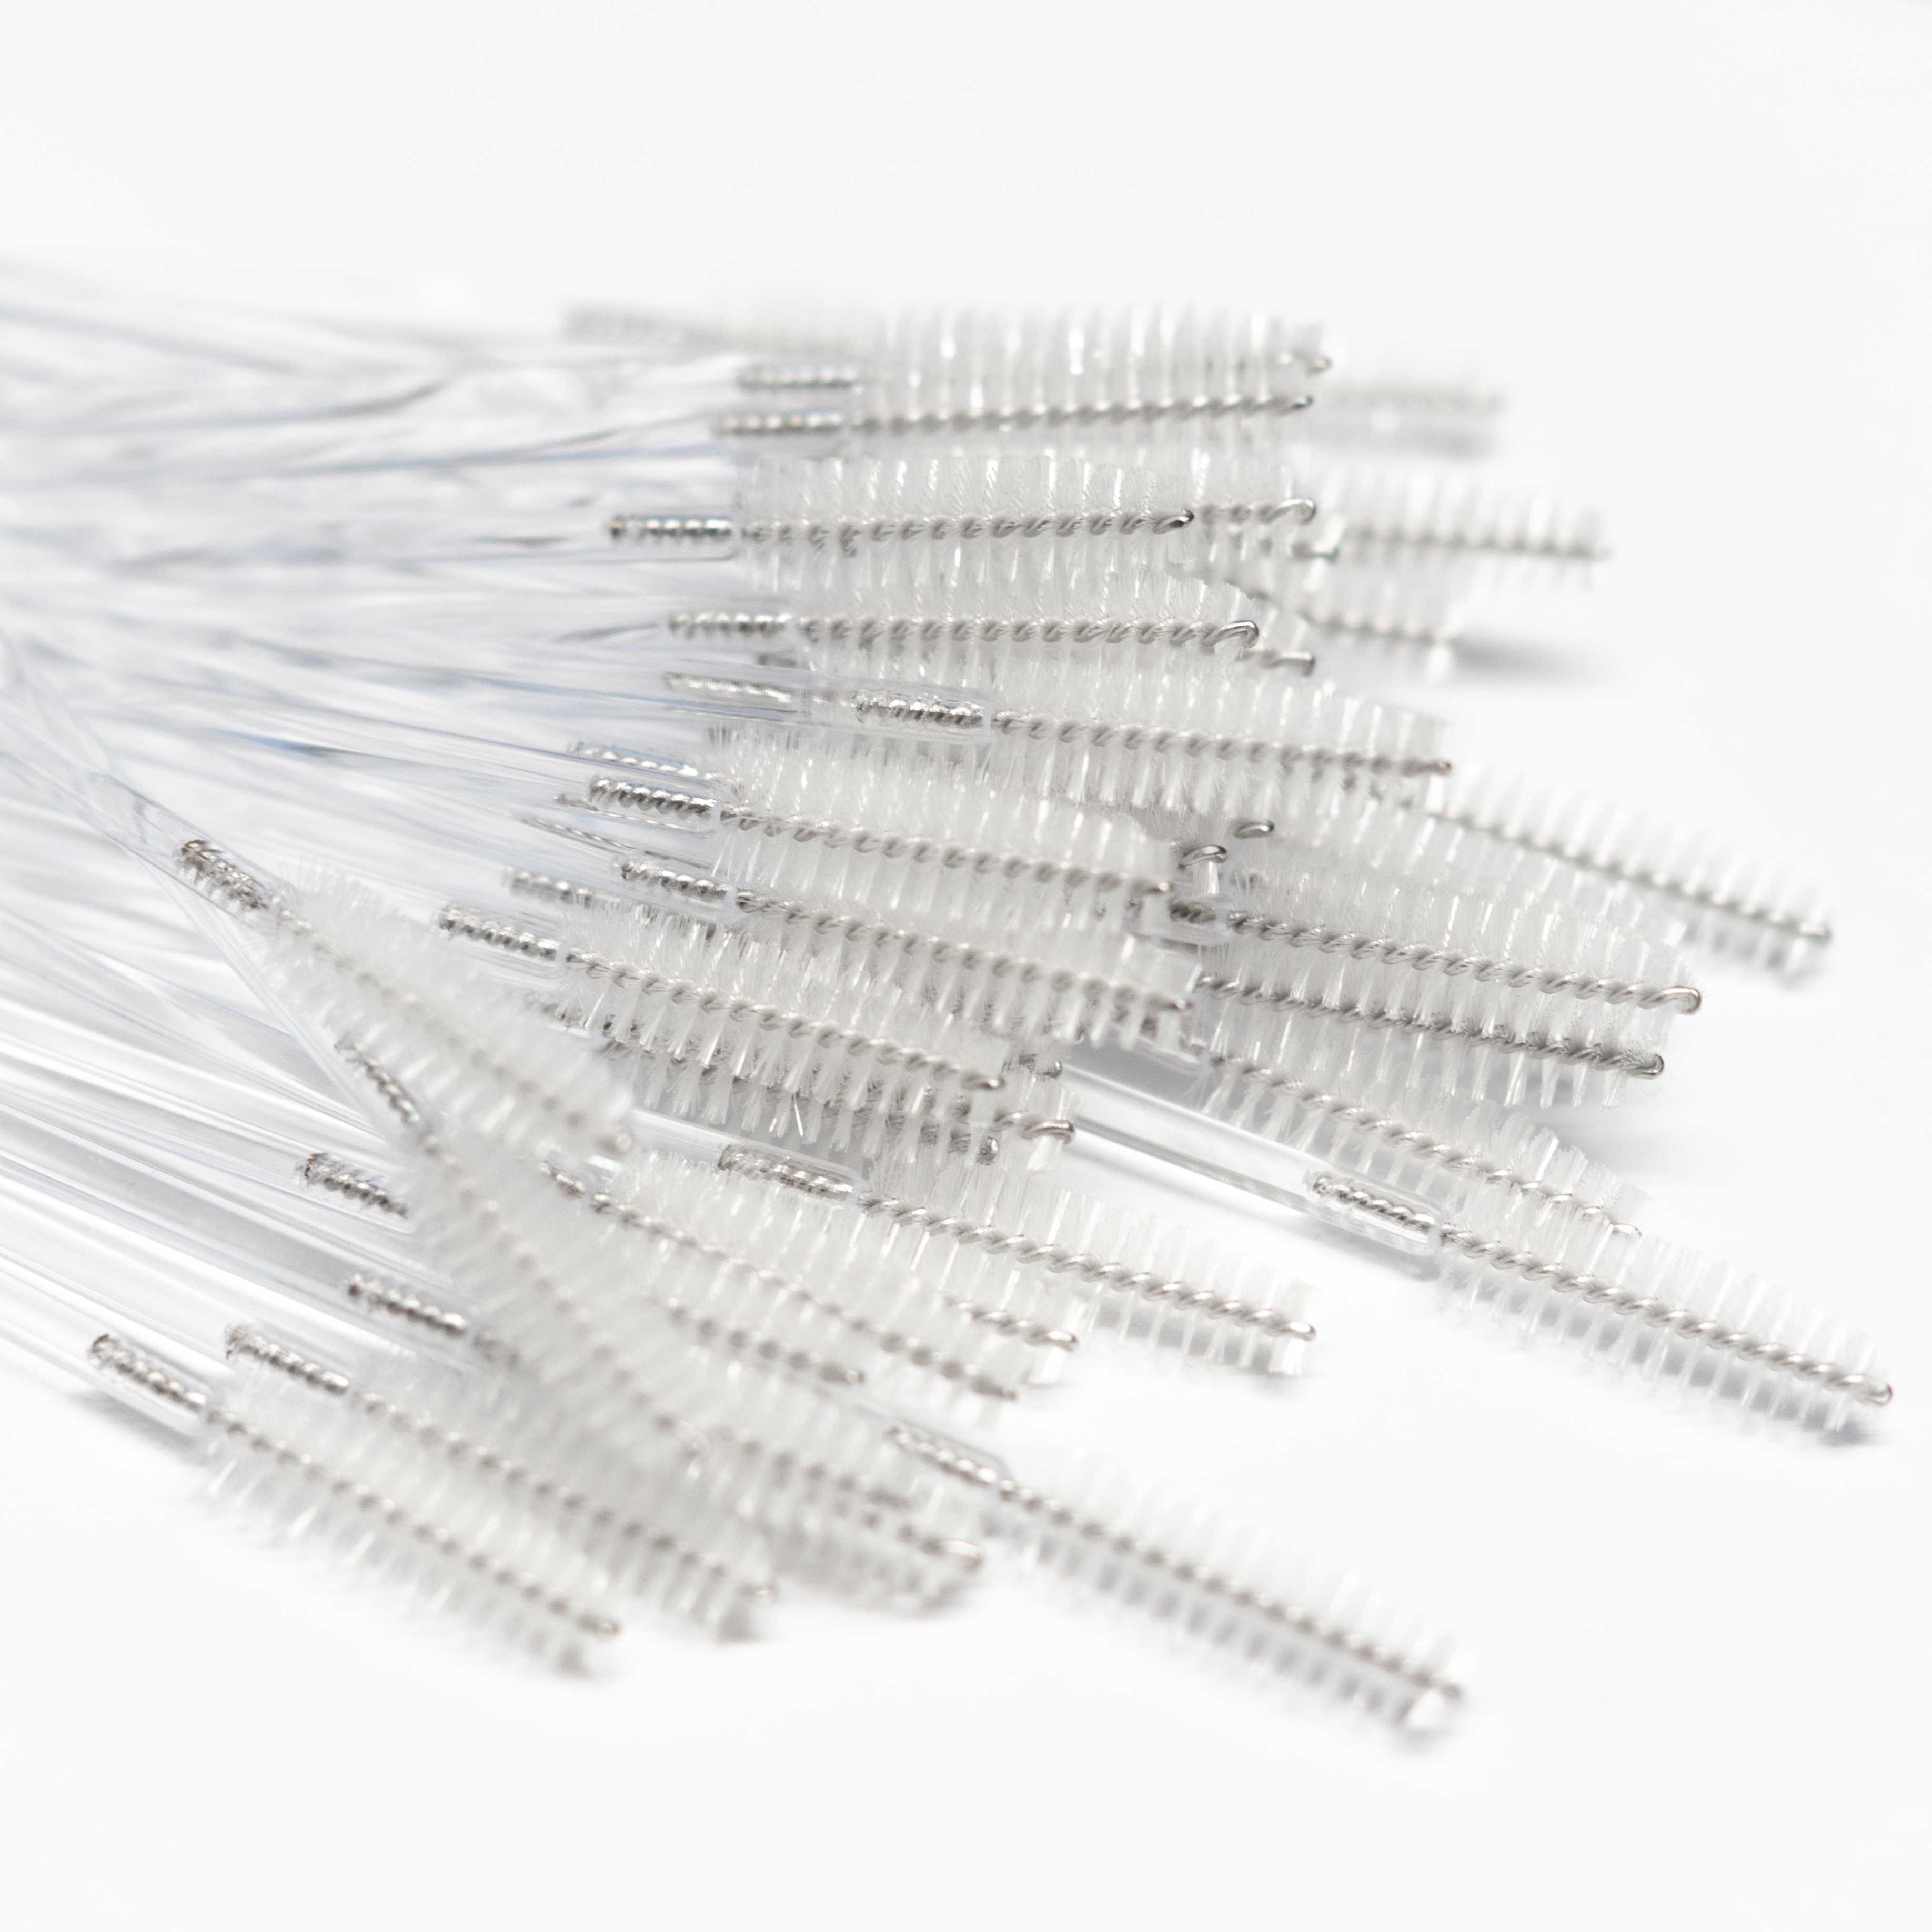 A pile of 50 mascara brushes on a white background